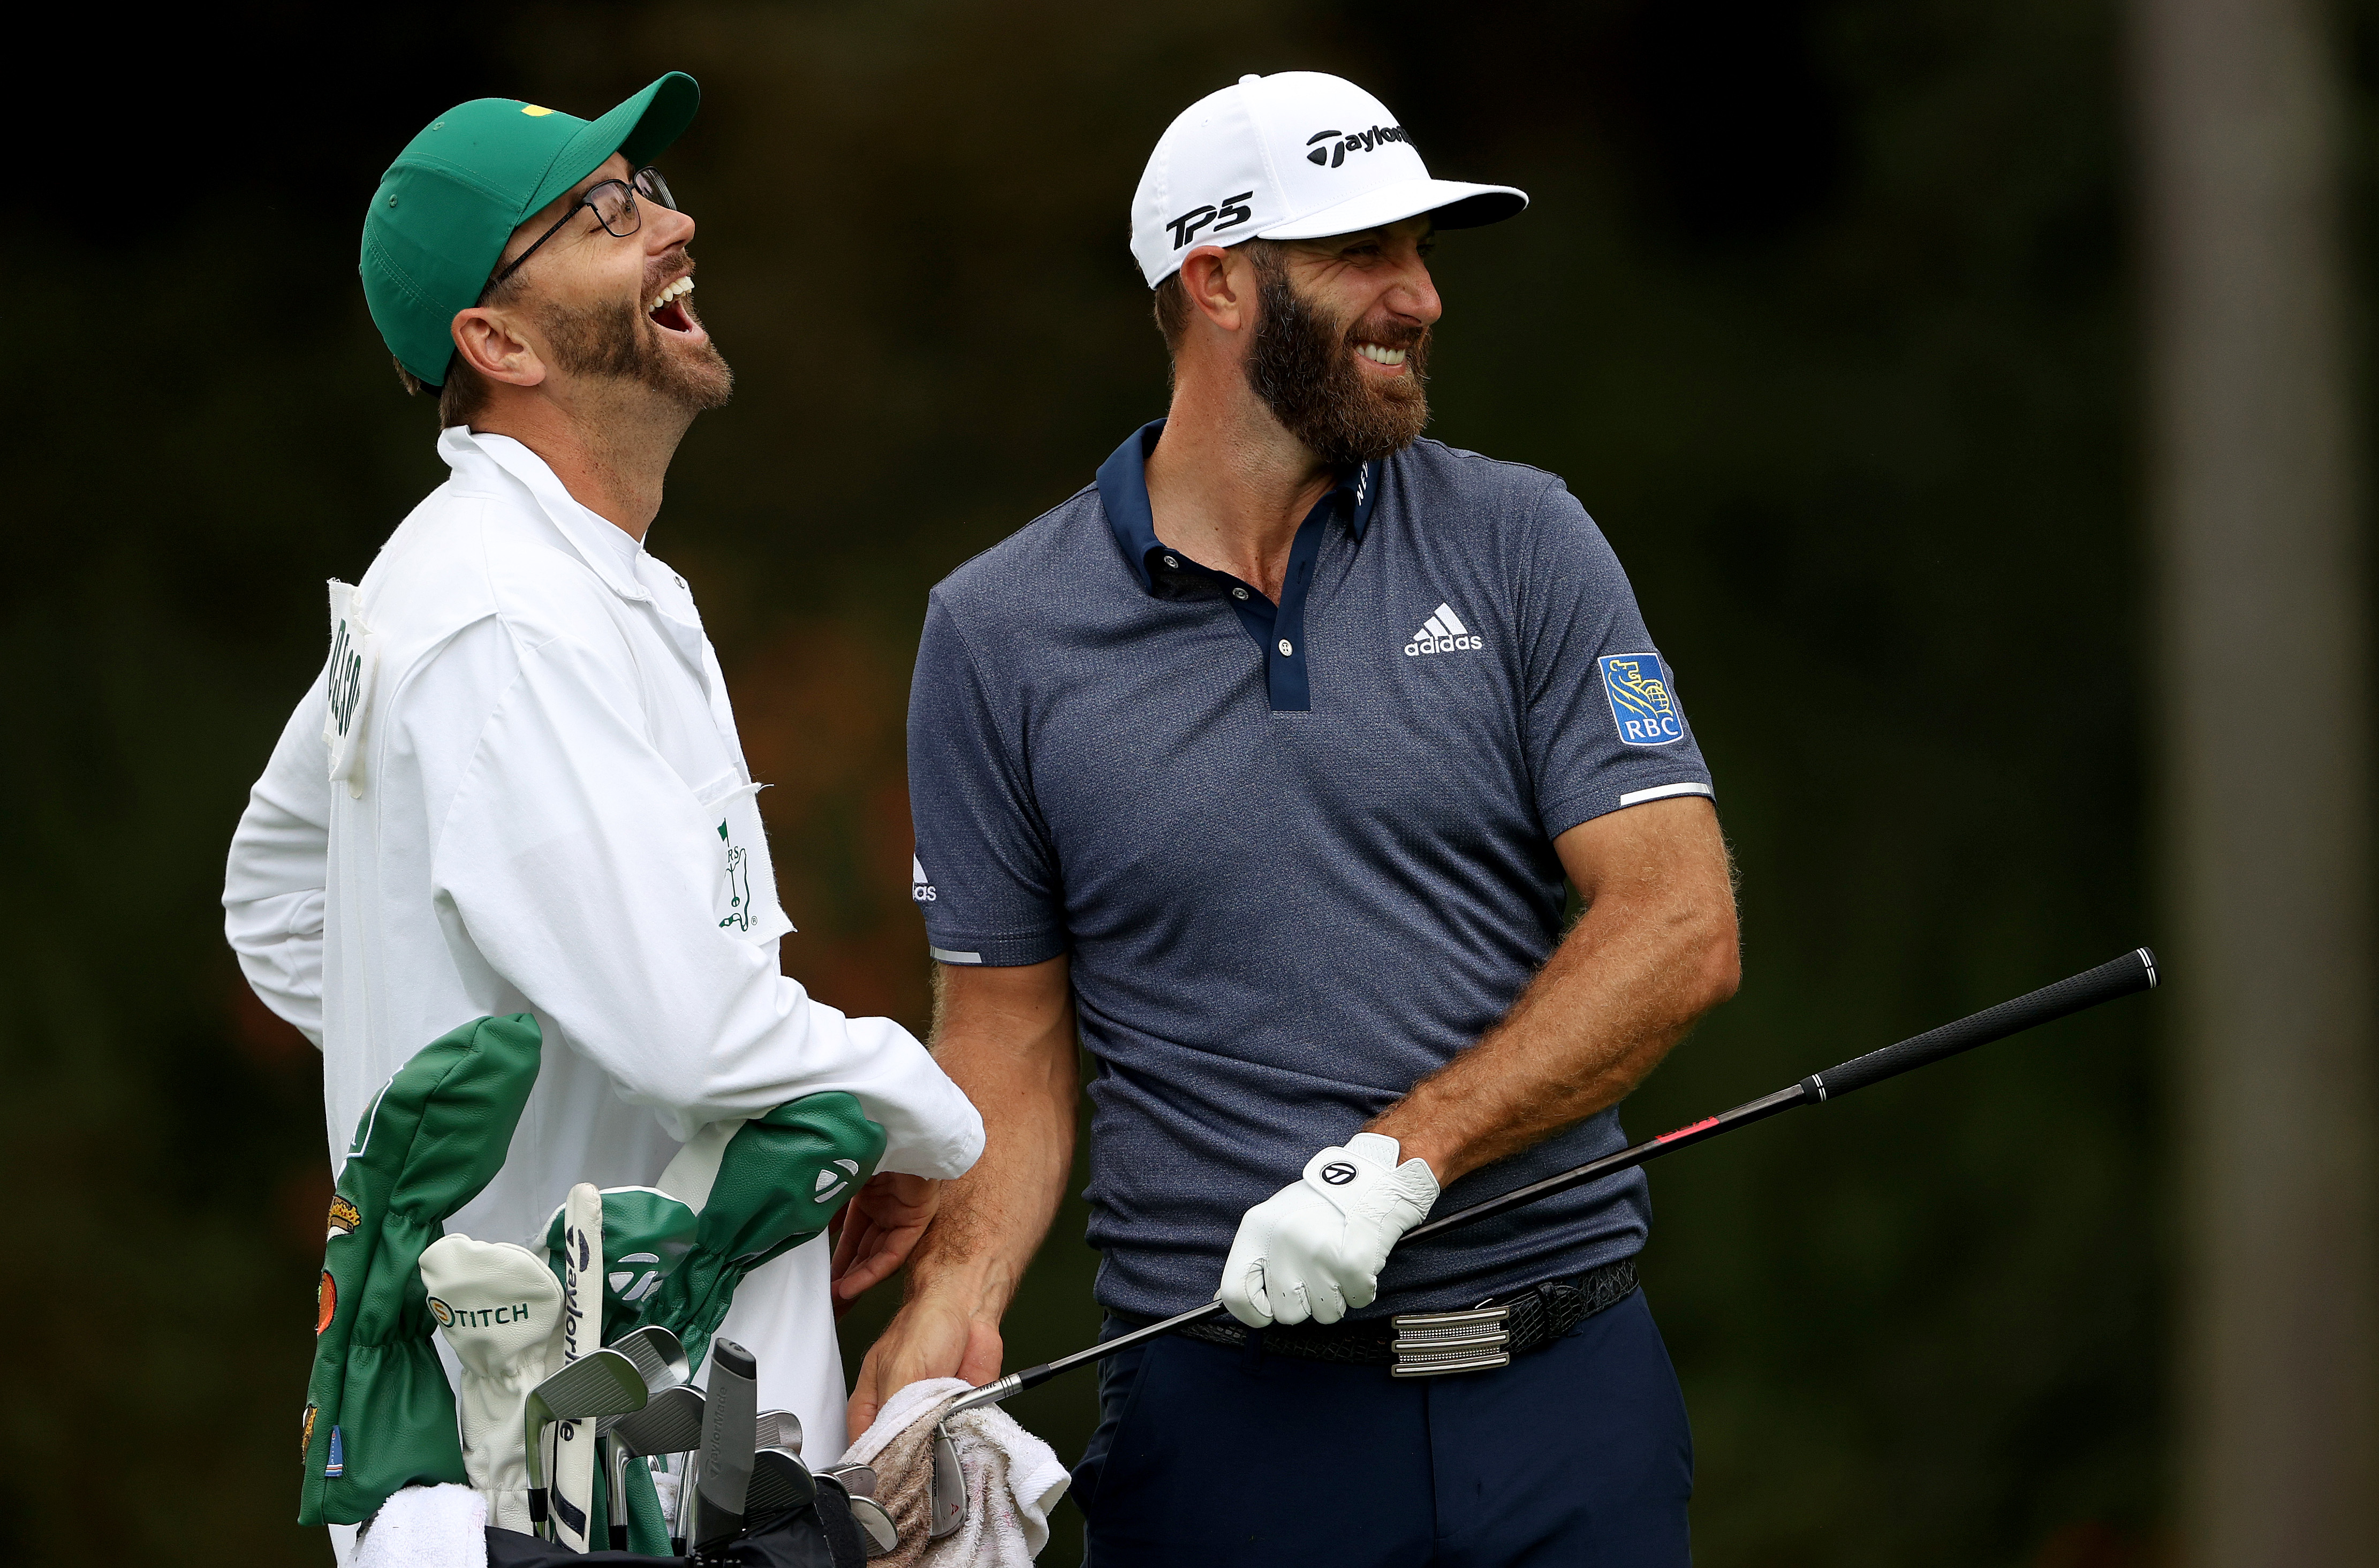 Golfer Star Dustin Johnson Gets His Natural Athleticism From His Grandfather, an LA Lakers Draft Pick